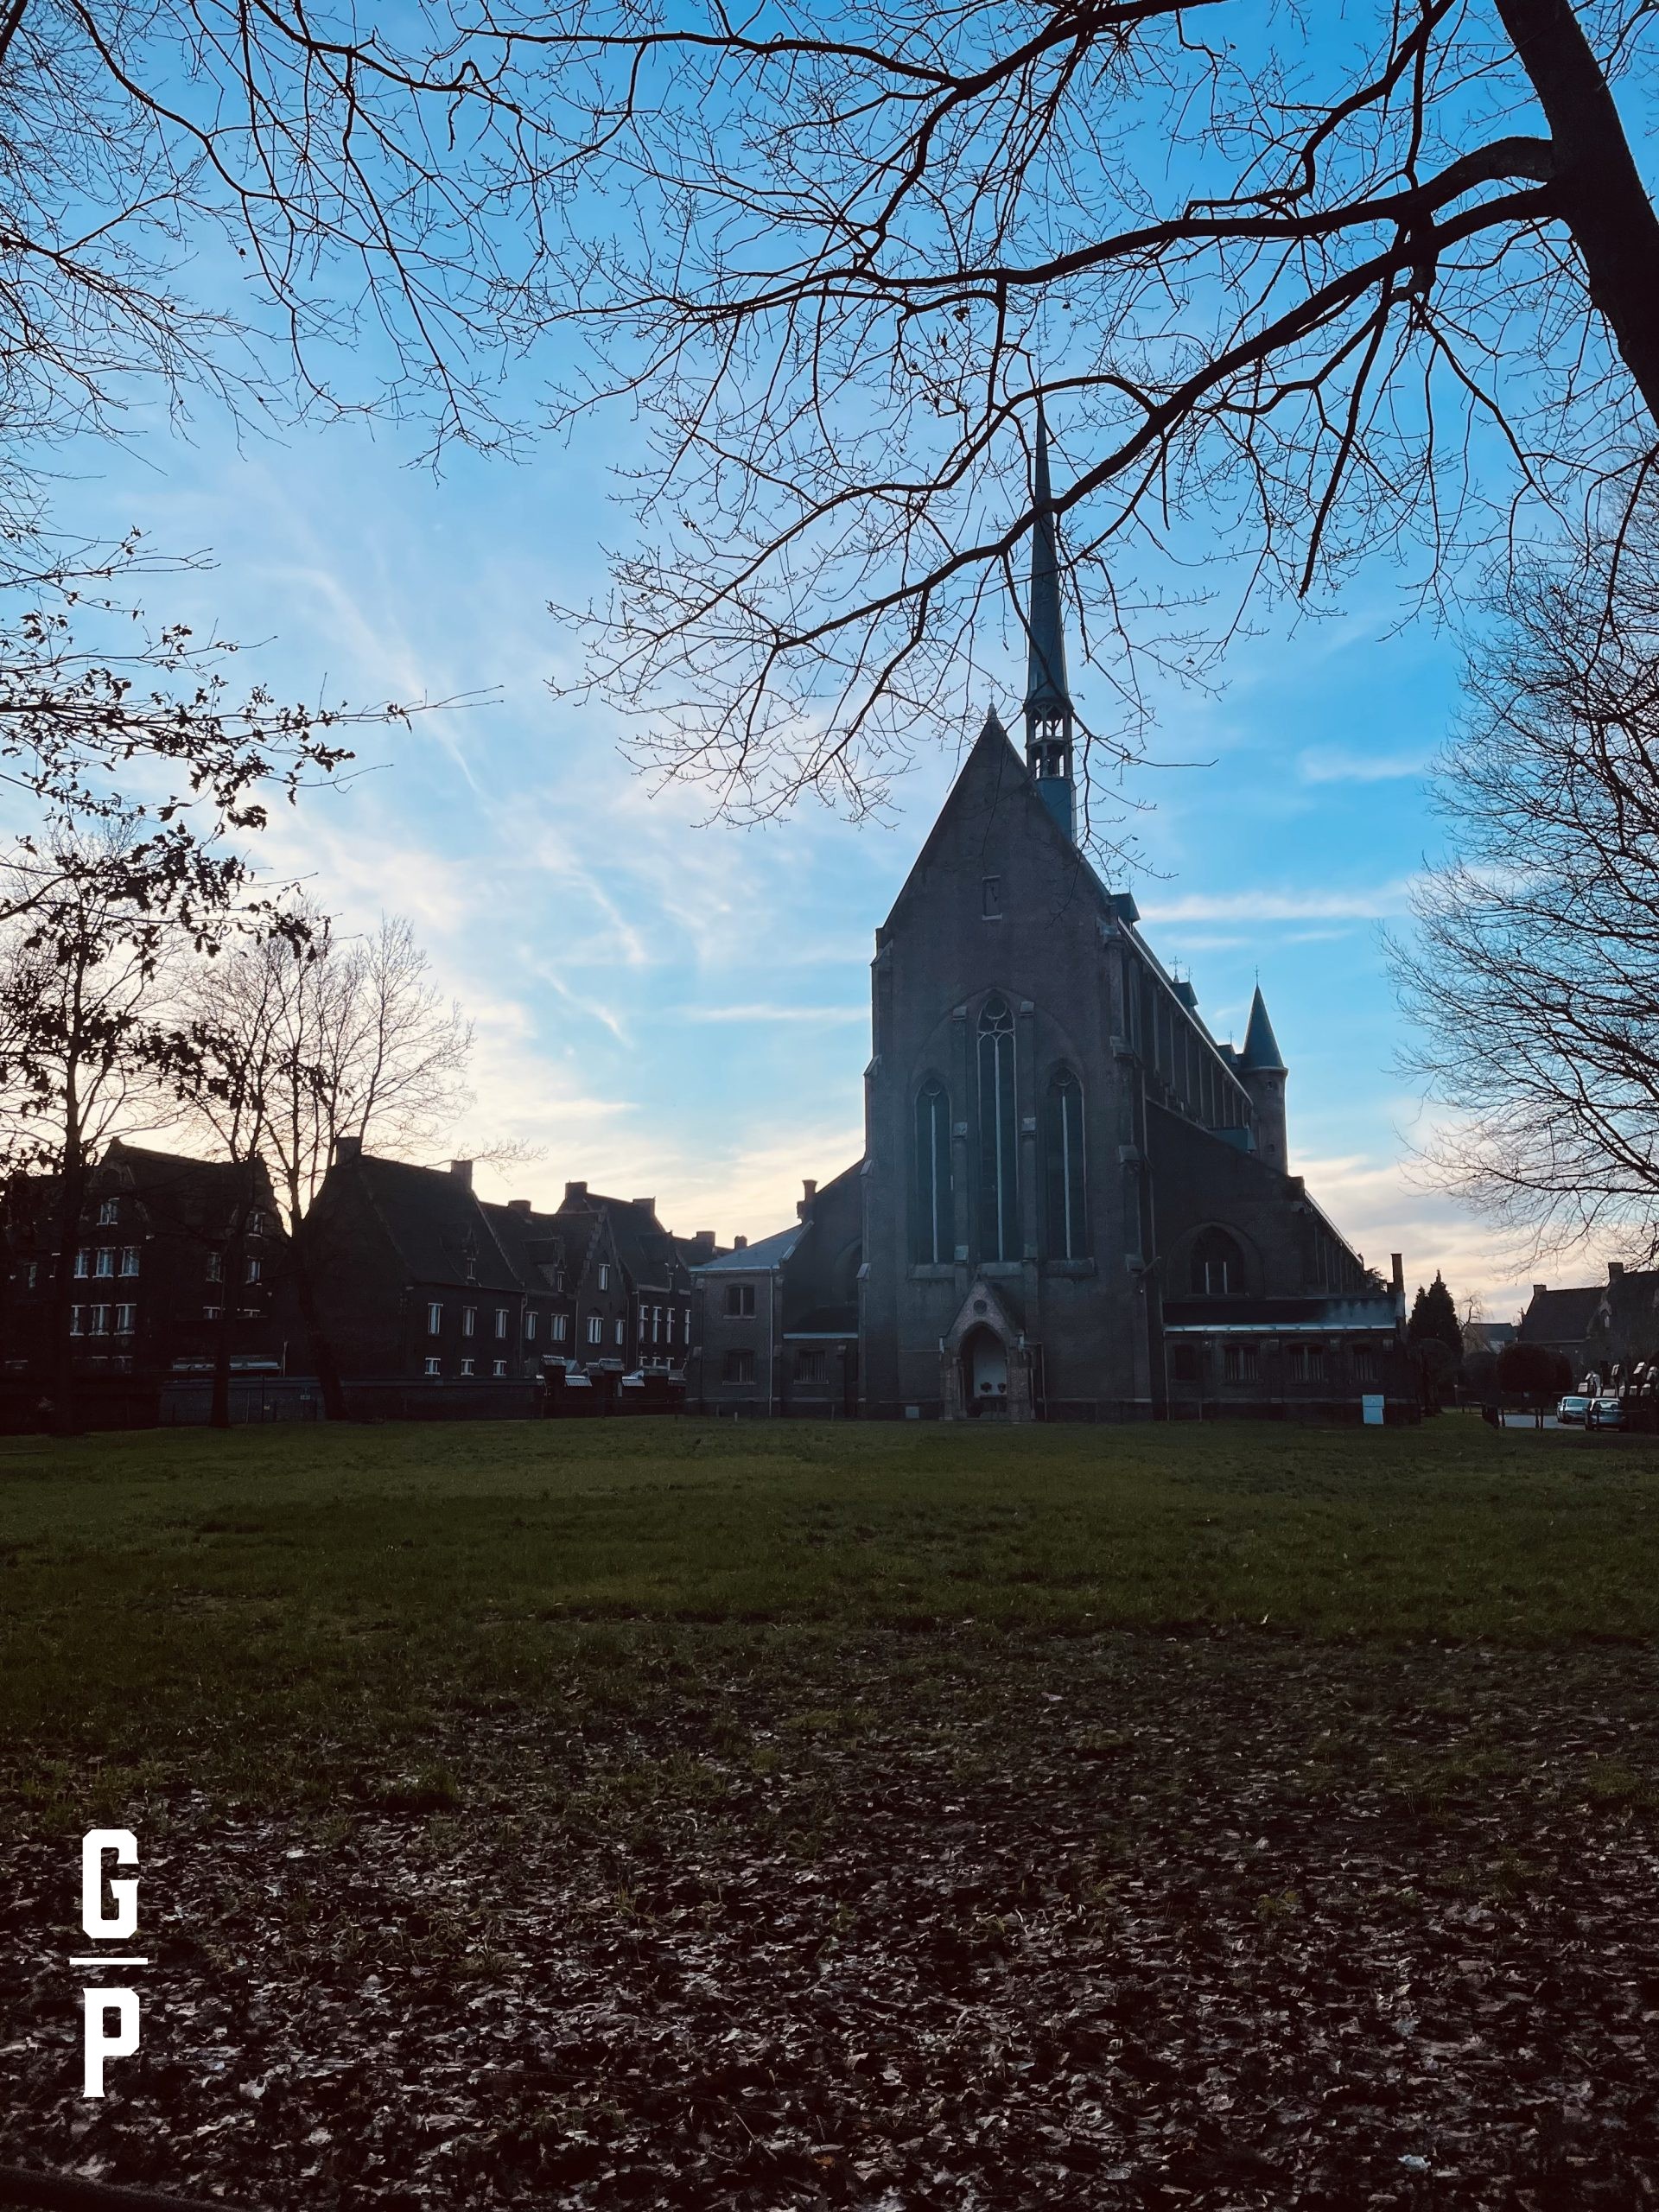 A wintry afternoon walk across the beguinage. 17/01/2023 - 16u43